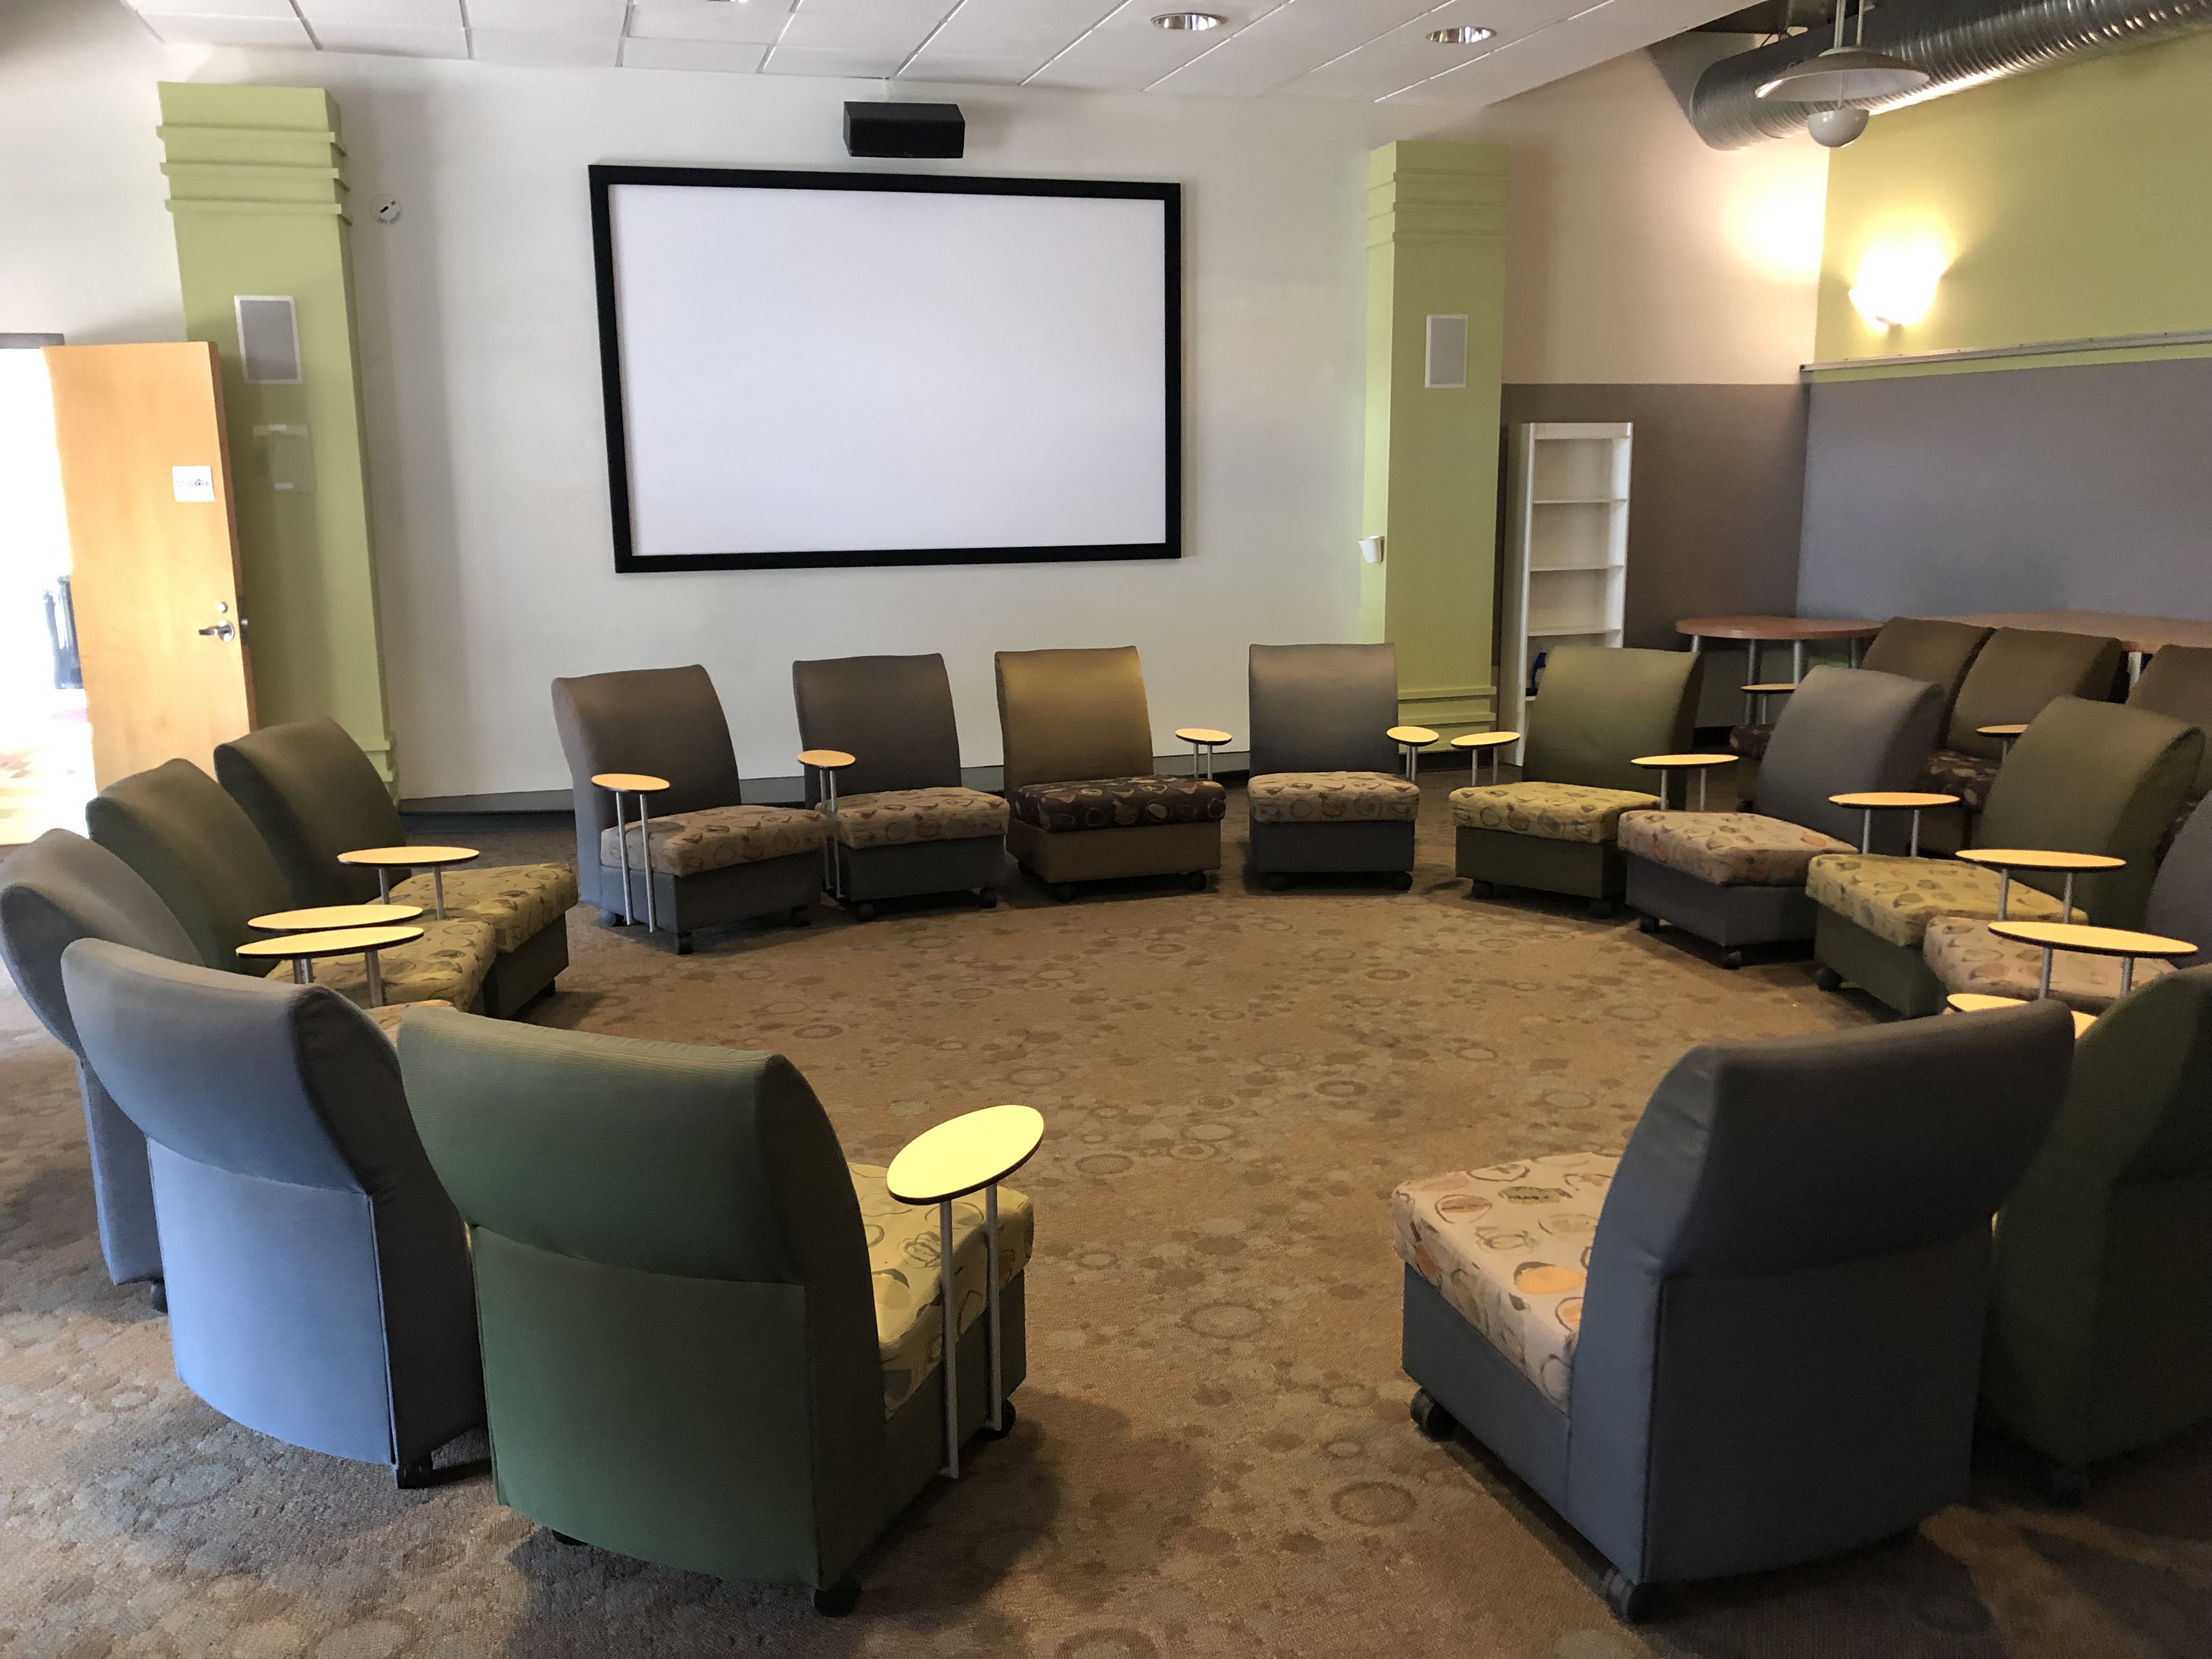 Studio B upholstered chairs with tablet desks in a circle, with projection screen